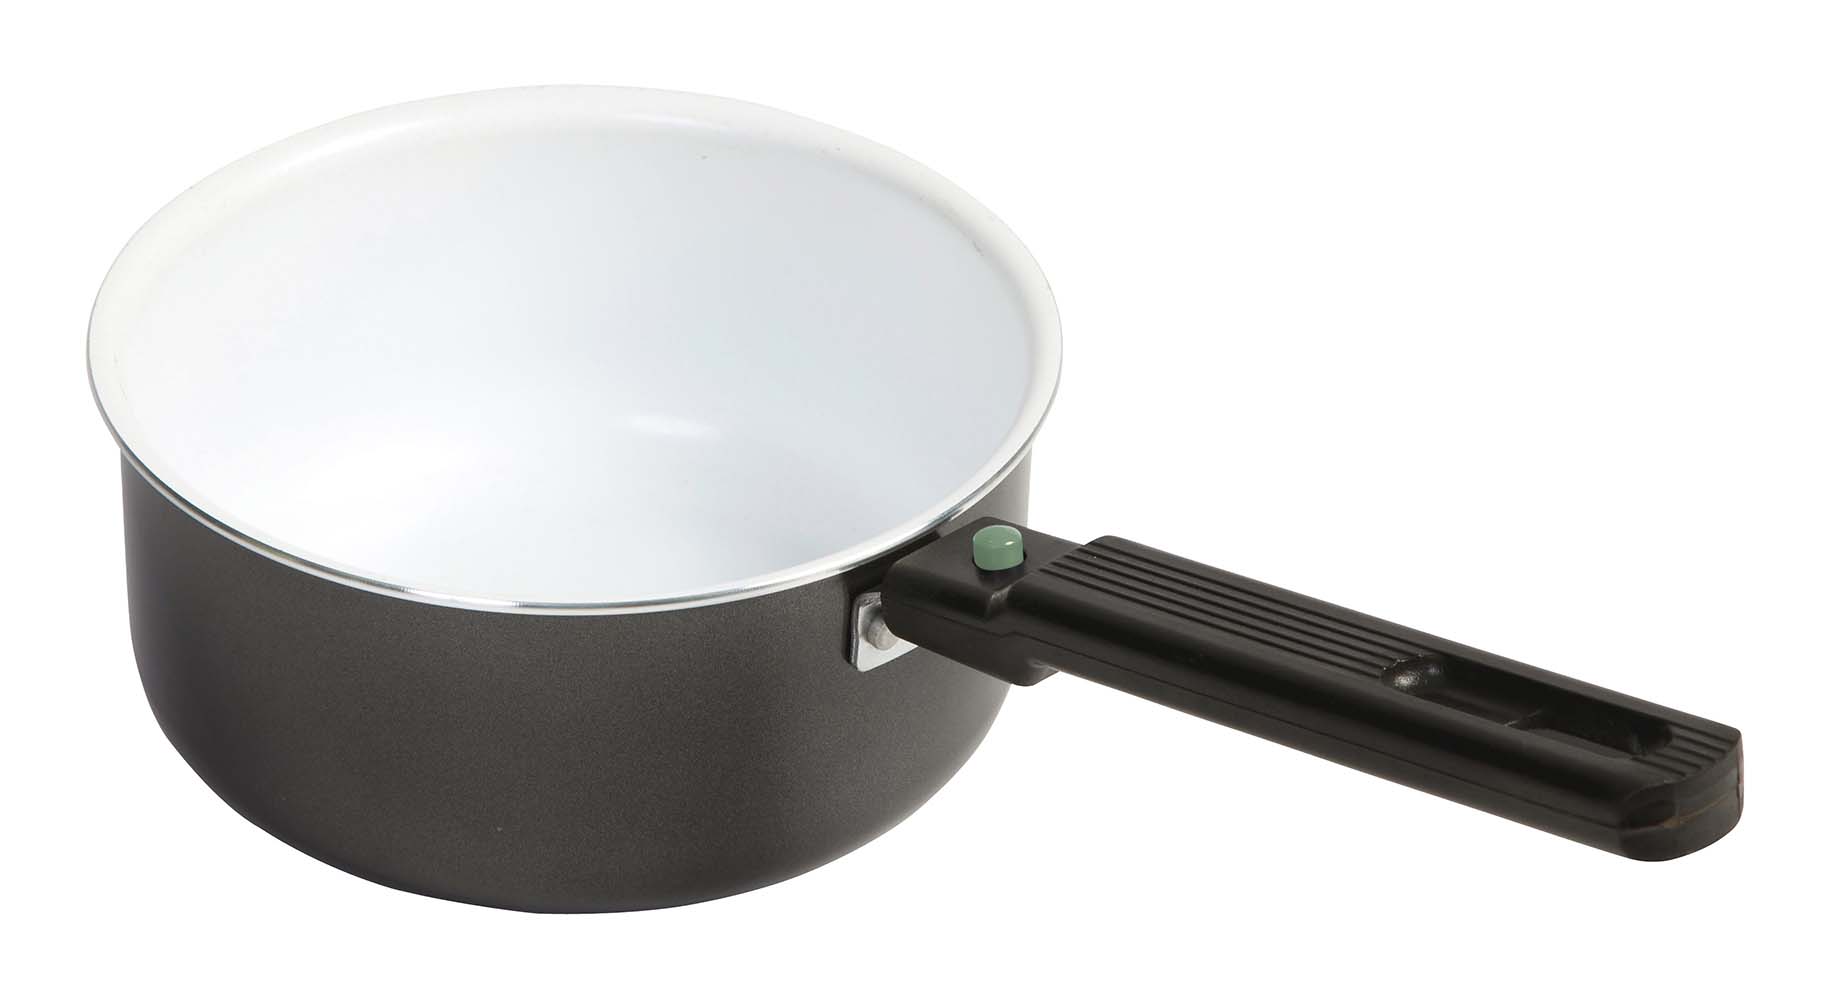 2304205 A compact saucepan with ceramic coating. The ceramic coating prevents sticking, is scratch-resistant and easy to clean. It is also healthier cooking, because less fat is needed to bake. Can be used for gas, ceramic and electrical heat sources. This pan has a removable handle and is therefore space-saving. Thickness: 2.2 millimetre